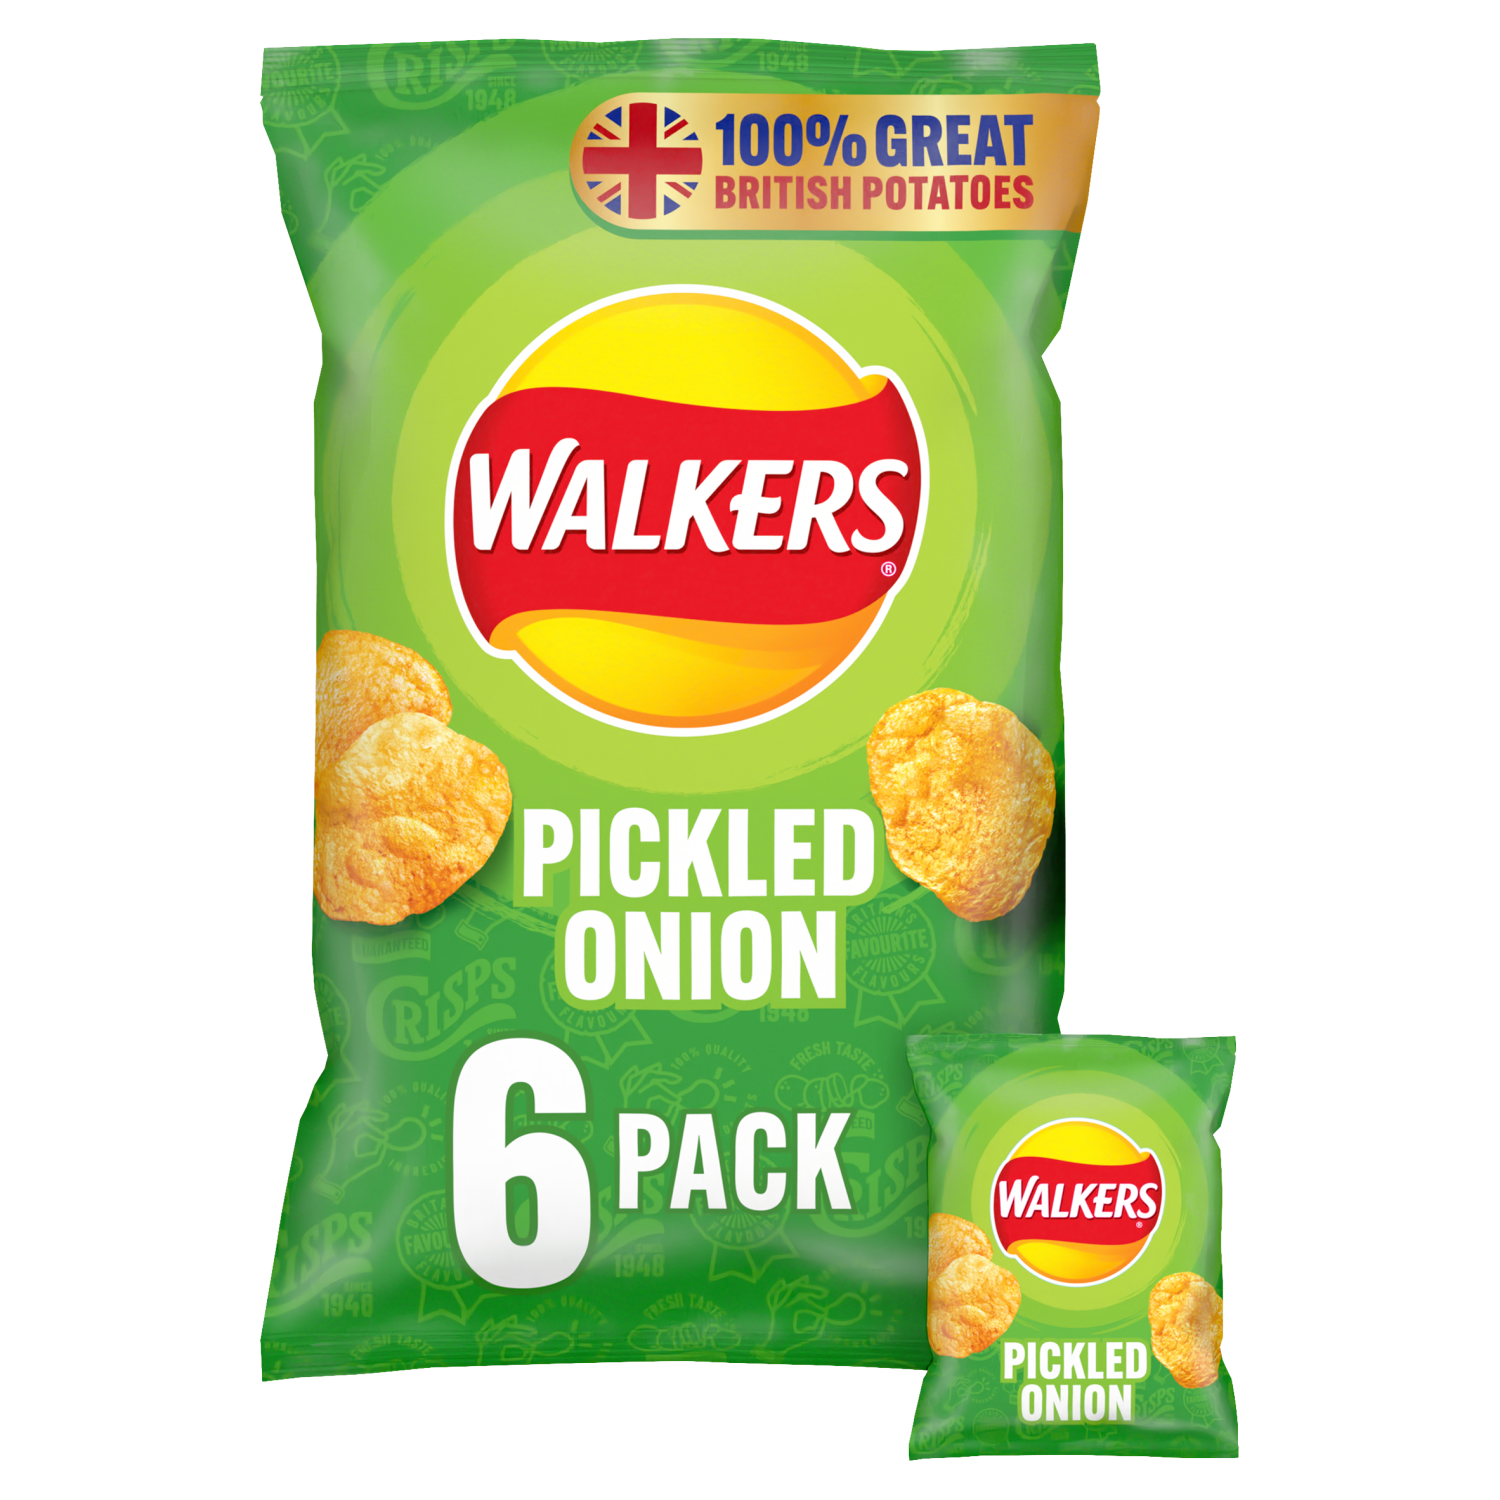 Walkers Crisps Chips Pickled Onion 6-Pack / 6 x 25g